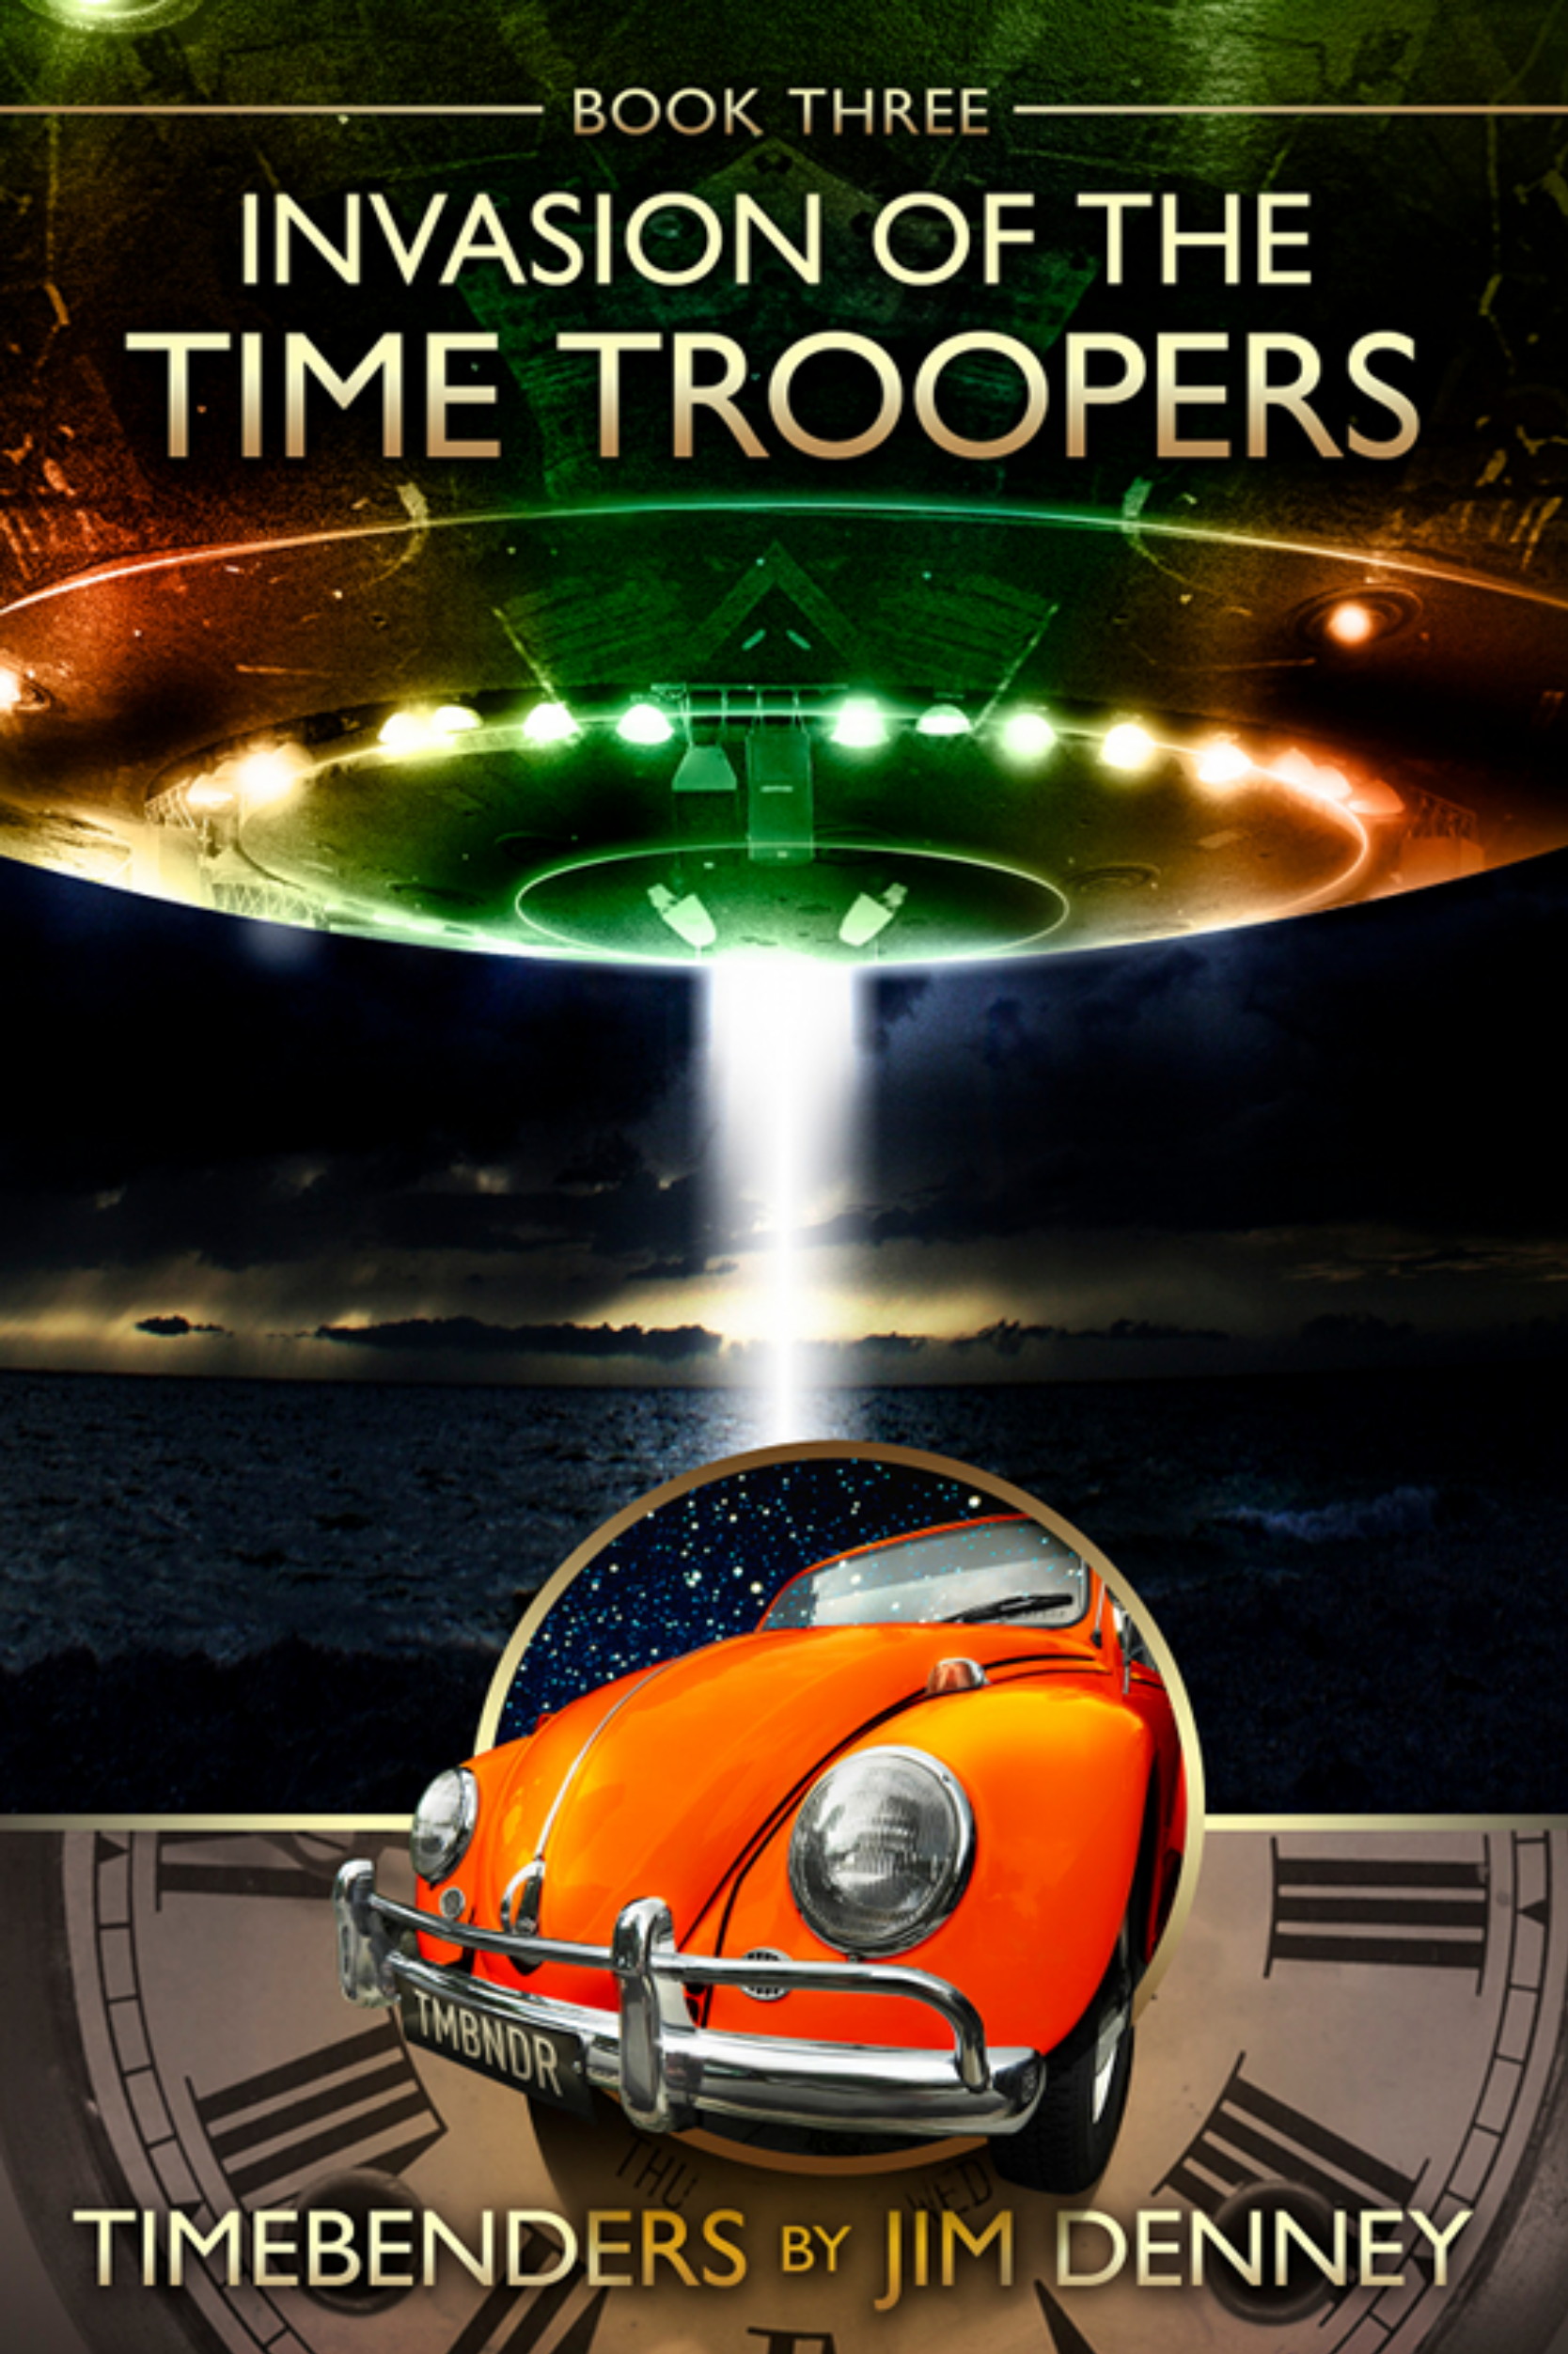 Invasion of Time Troopers Ebook Cover